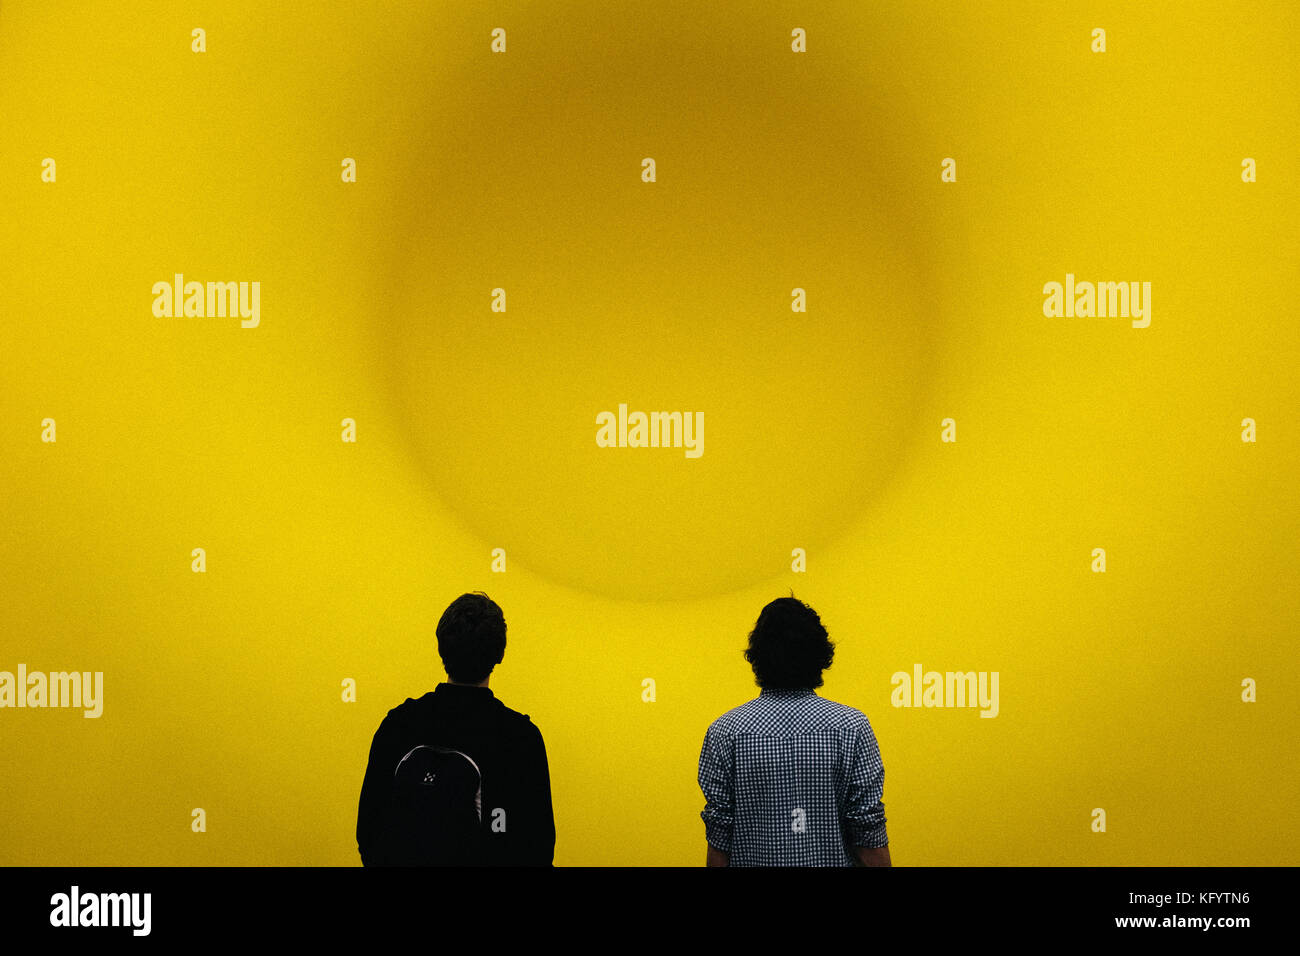 Istanbul, Turkey - January 21, 2014. Two visitors are looking at Anish Kapoor's work Yellow at the Sakip Sabanci Museum in Istanbul. Stock Photo